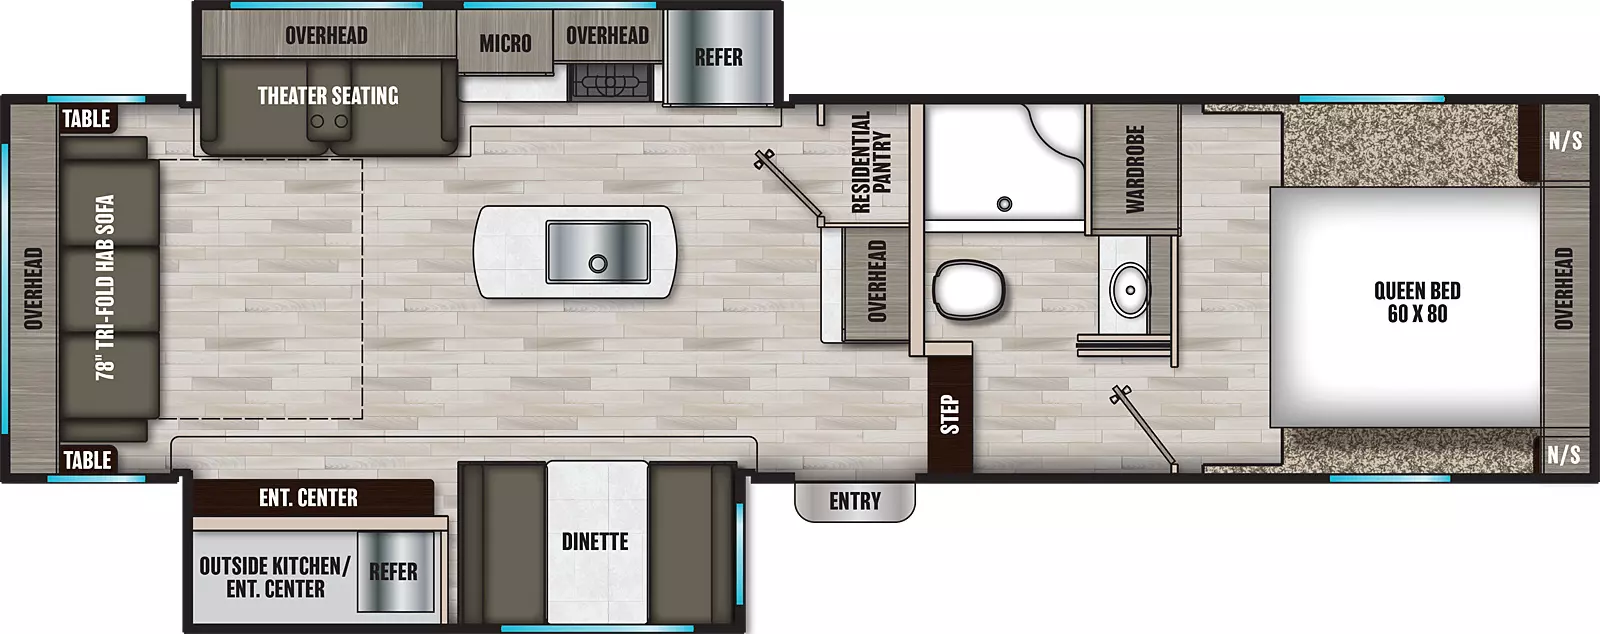 The 284RL has two slideouts and one entry. Exterior features an outside kitchen with entertainment center. Interior layout front to back: front bedroom with a foot facing queen bed with overhead cabinet, night stands on either side, and off-door side wardrobe; off-door side aisle full bathroom; step down to main living area and entry; counter with overhead cabinet, and residential pantry along inner wall; kitchen island with sink; off-door side slideout with refrigerator, countertop, overhead cabinet, microwave, and theater seating with overhead cabinet; door side slideout with dinette and entertainment center; rear tri-fold hide-a-bed sofa with tables on each side, and overhead cabinet.